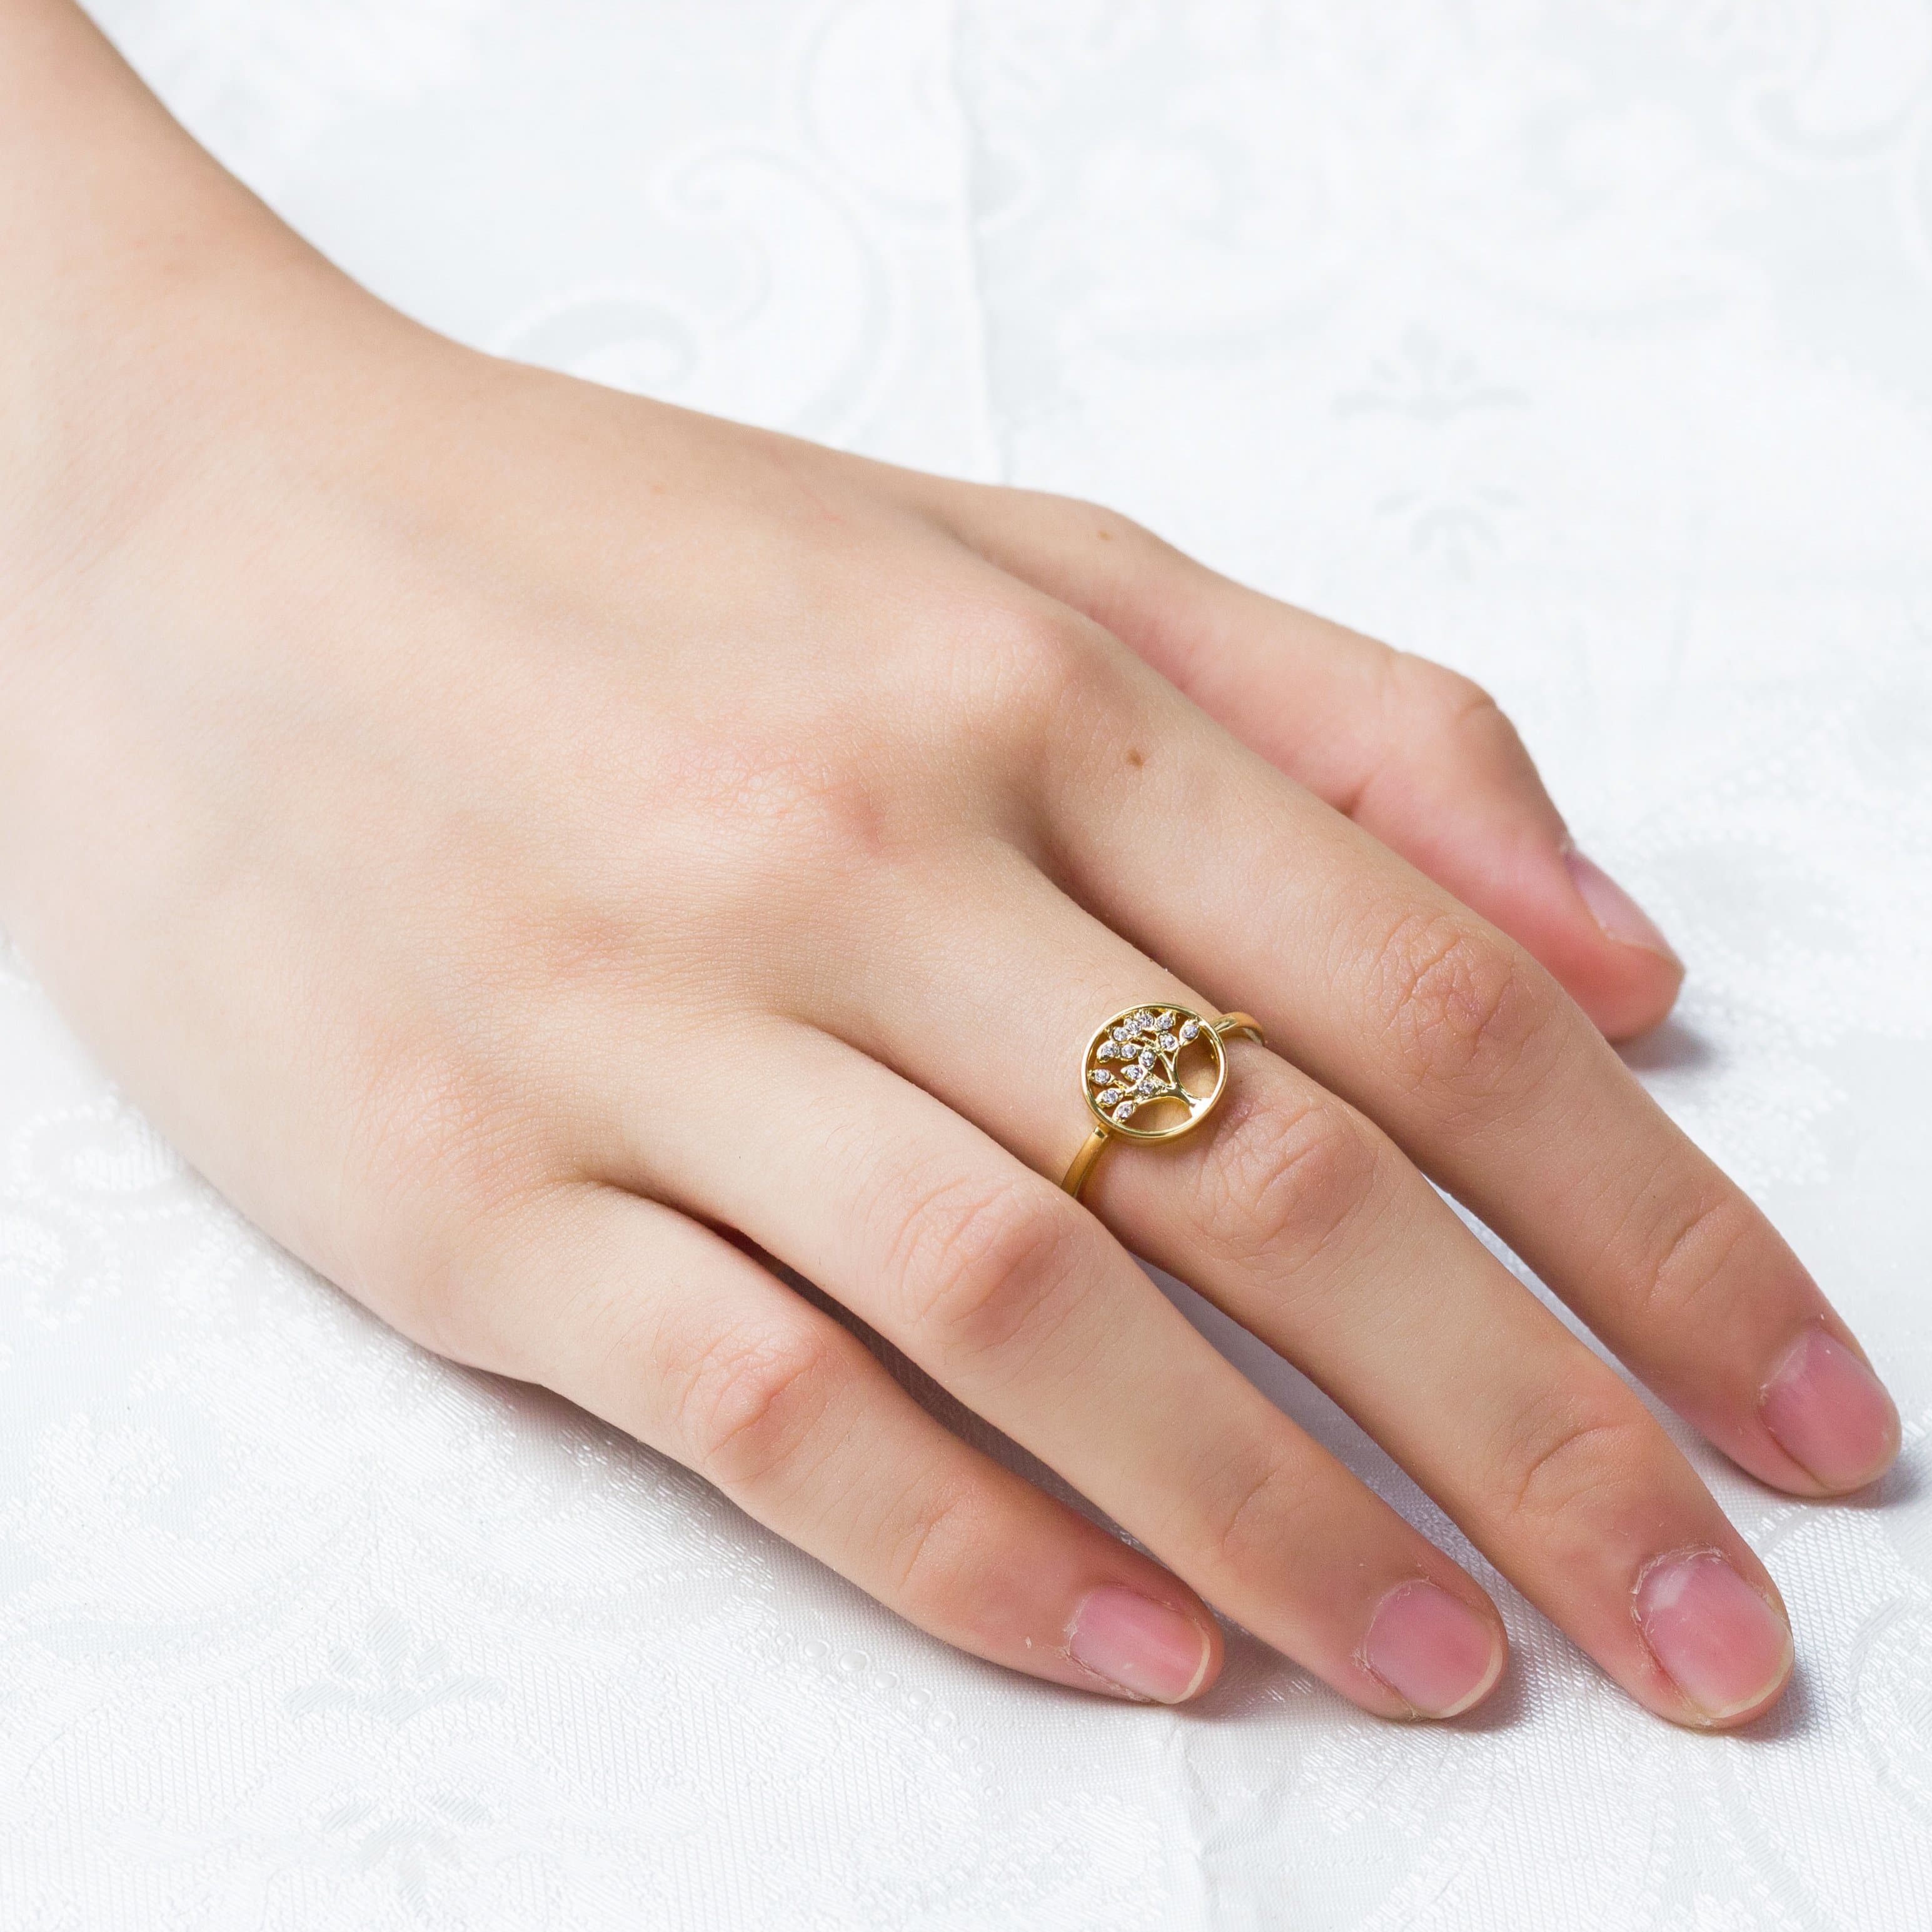 Gold Plated Tree of Life Ring Created with Zircondia® Crystals